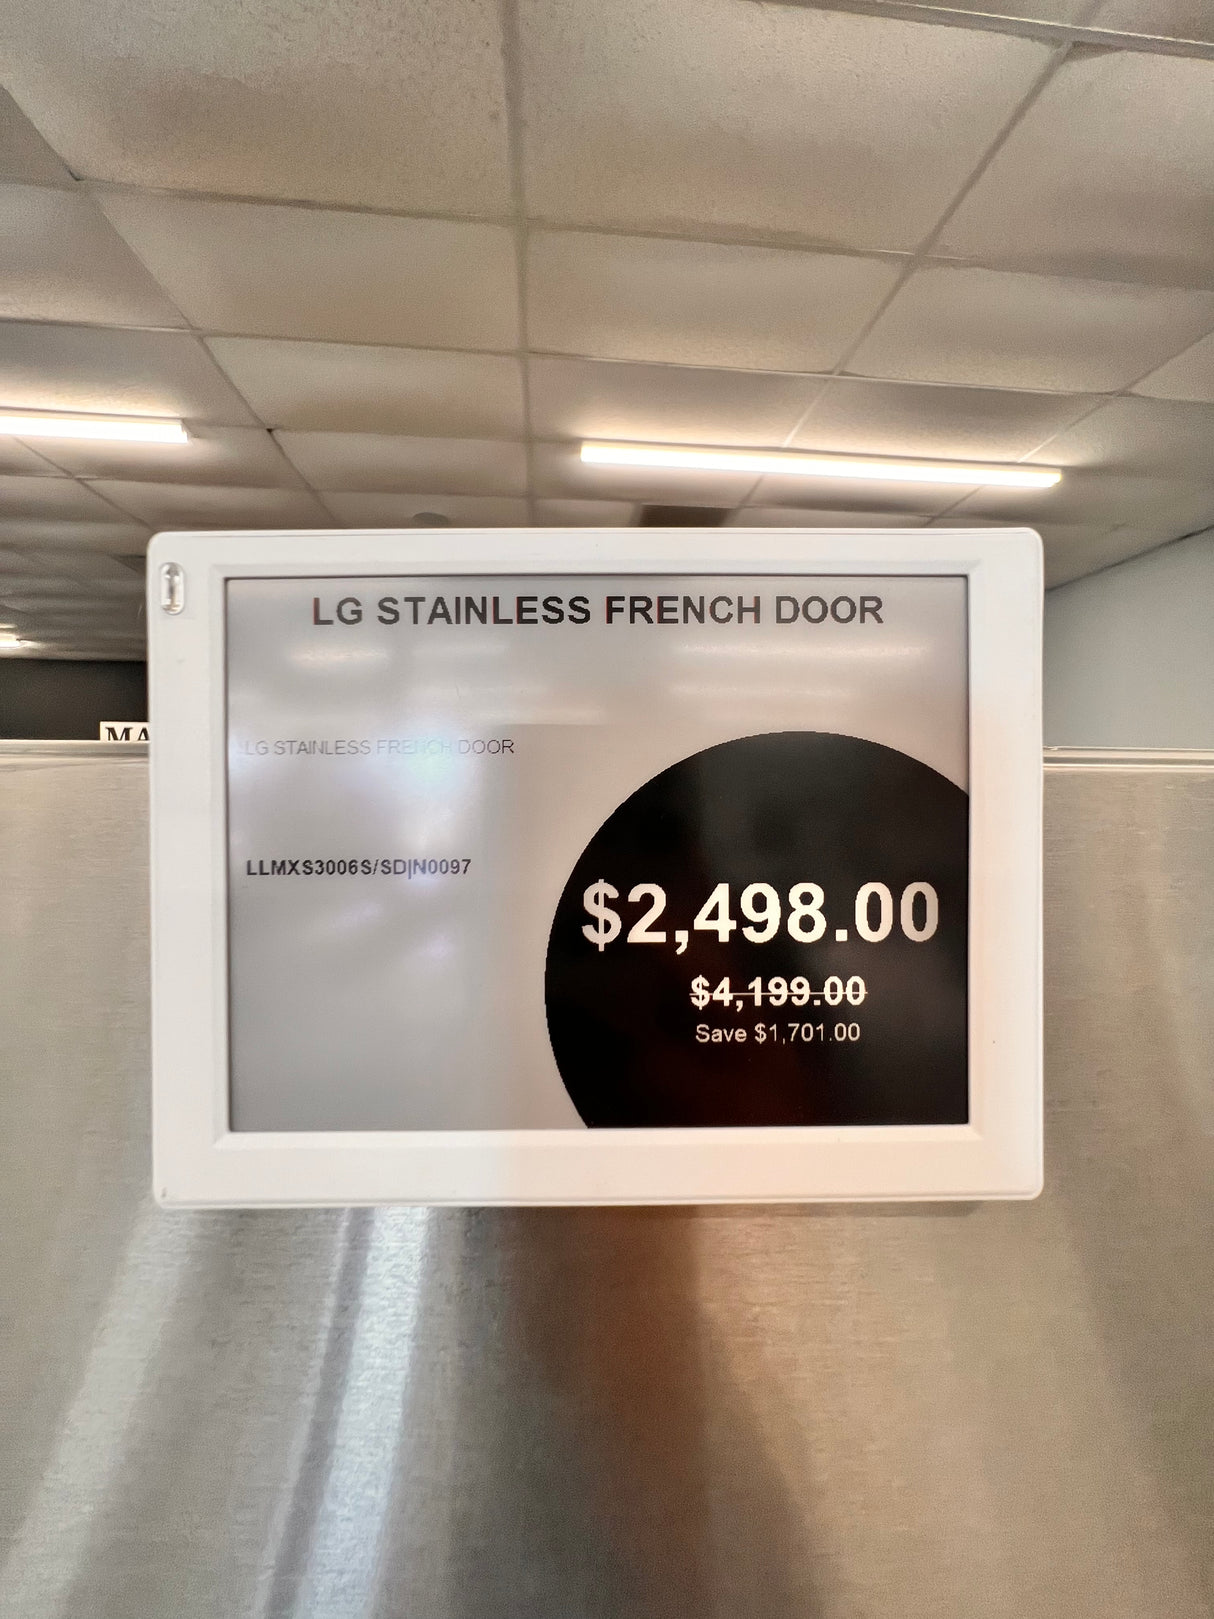 Copy of LG STAINLESS FRENCH DOOR LLMXS 3006S/SD